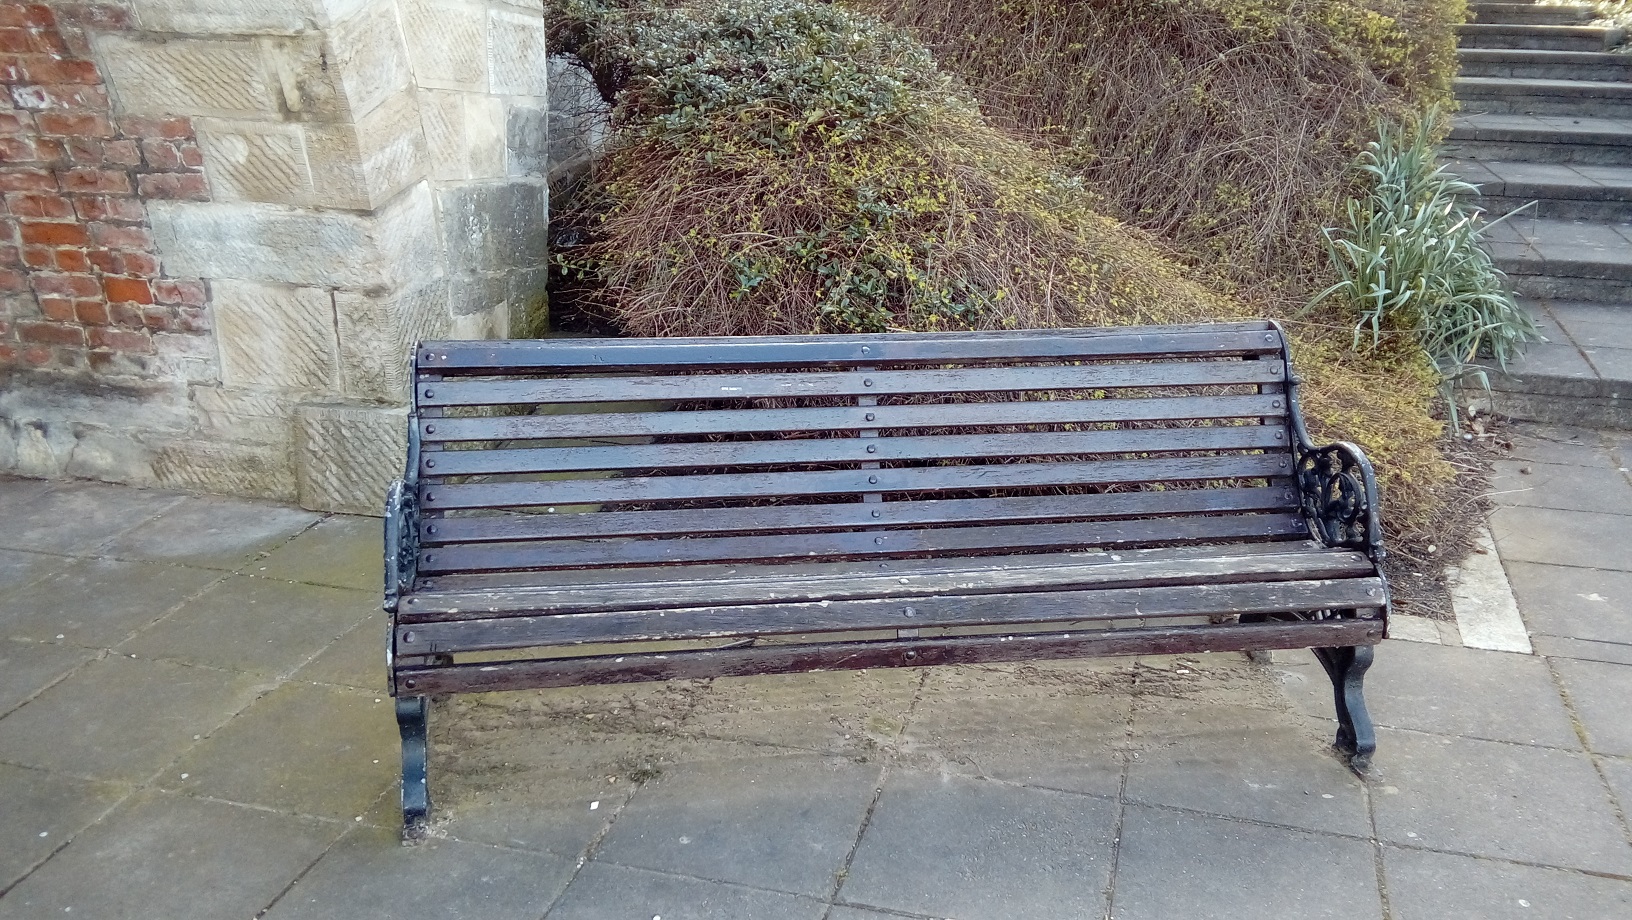 Bench in urban area